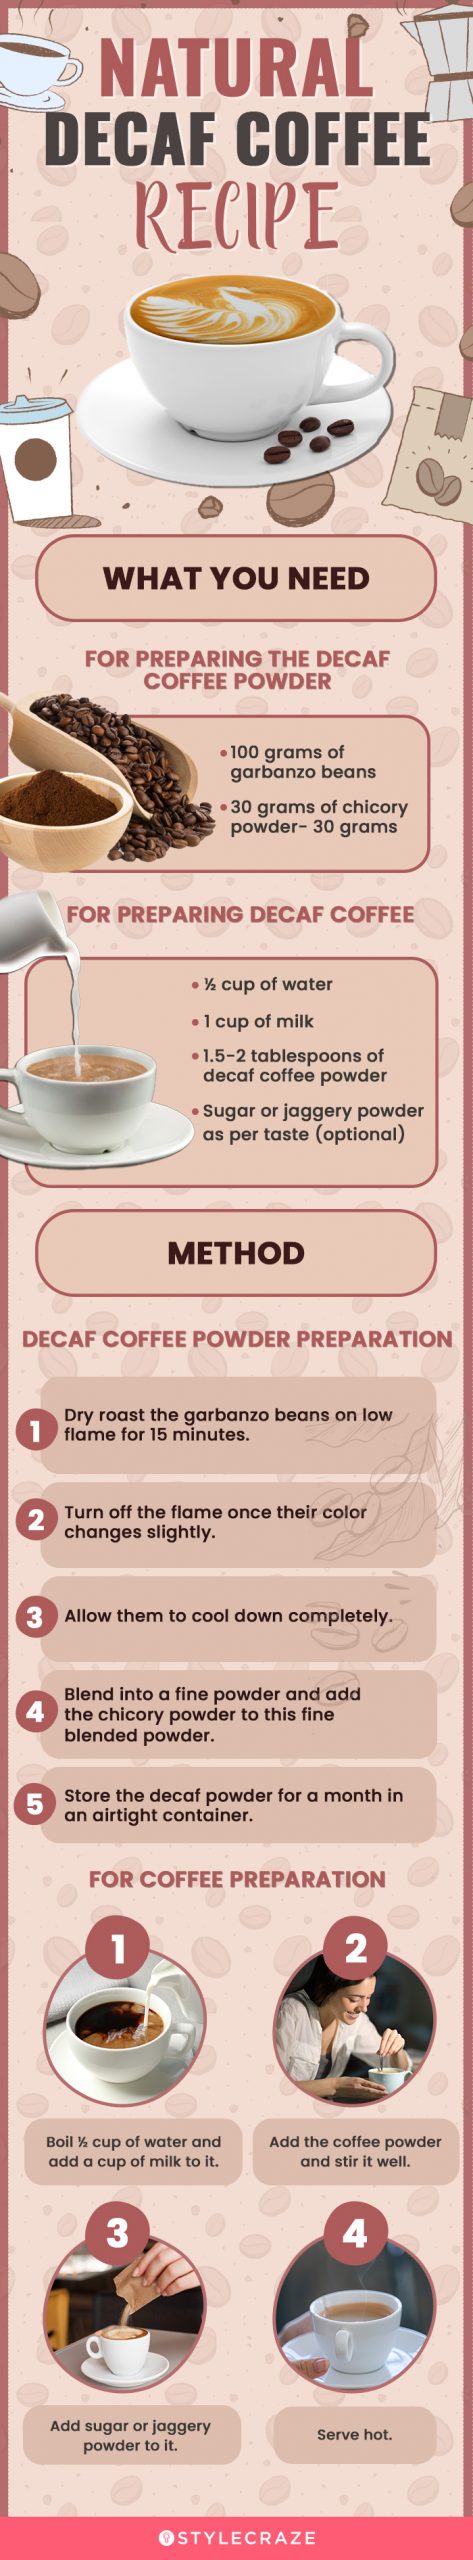 natural decaf coffee recipe (infographic)